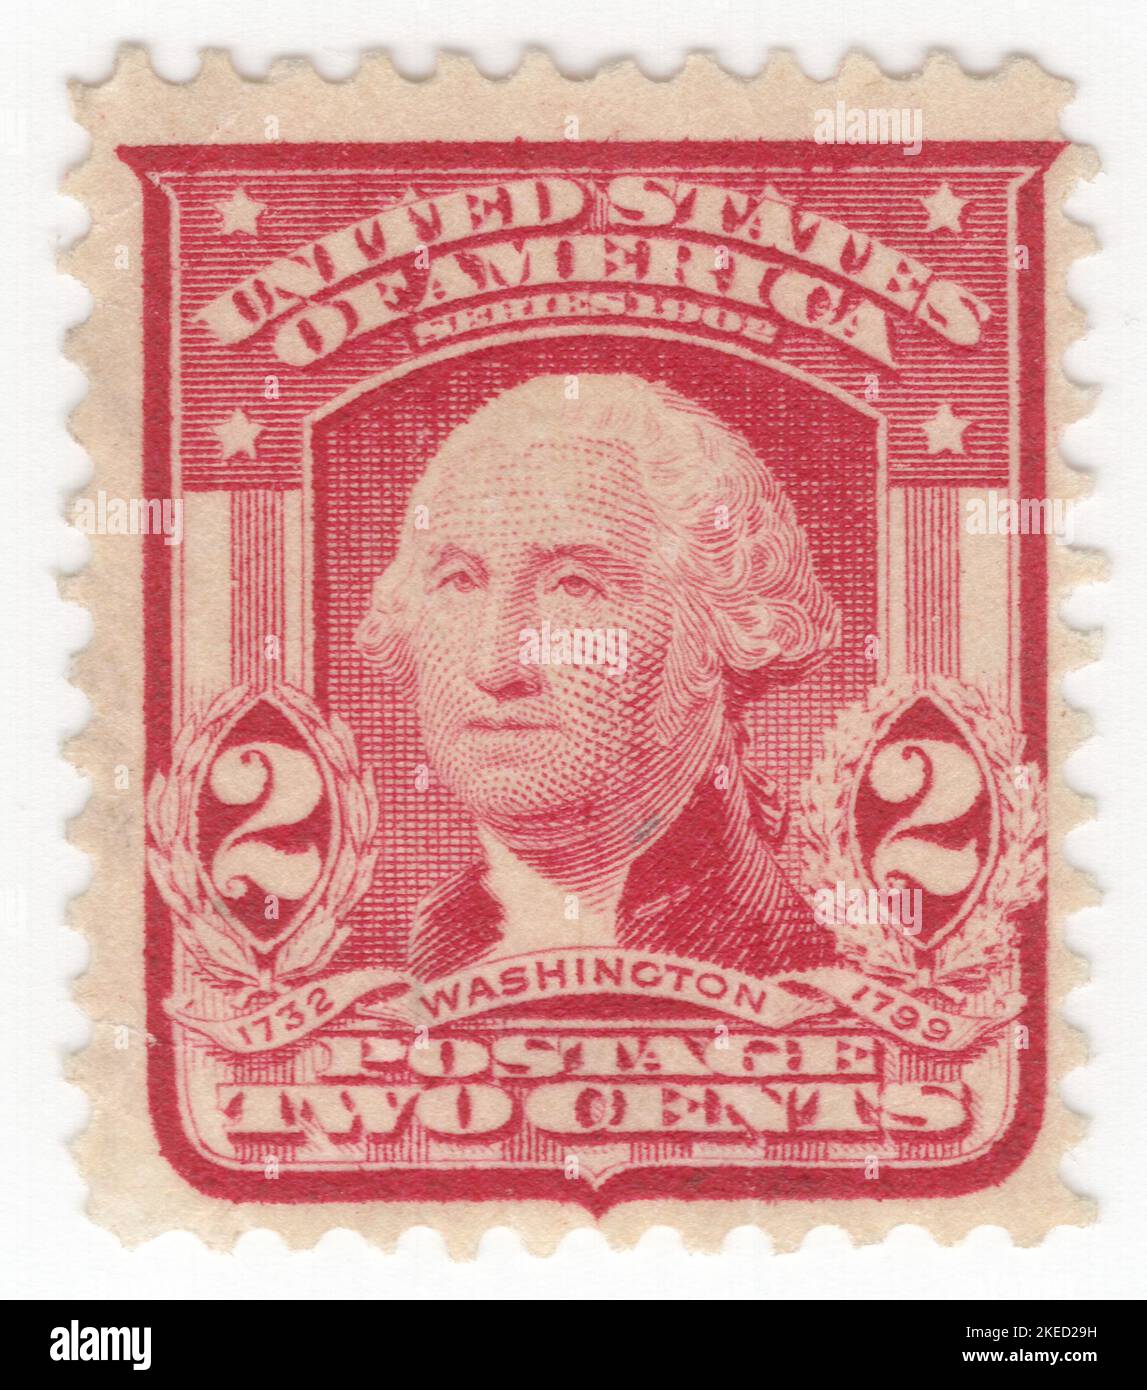 USA - 1903: An 2 cents lake postage stamp depicting portrait of George Washington. American military officer, statesman, and Founding Father who served as the first president of the United States from 1789 to 1797. Appointed by the Continental Congress as commander of the Continental Army, Washington led the Patriot forces to victory in the American Revolutionary War and served as the president of the Constitutional Convention of 1787, which created the Constitution of the United States and the American federal government. Washington has been called the 'Father of his Country' Stock Photo